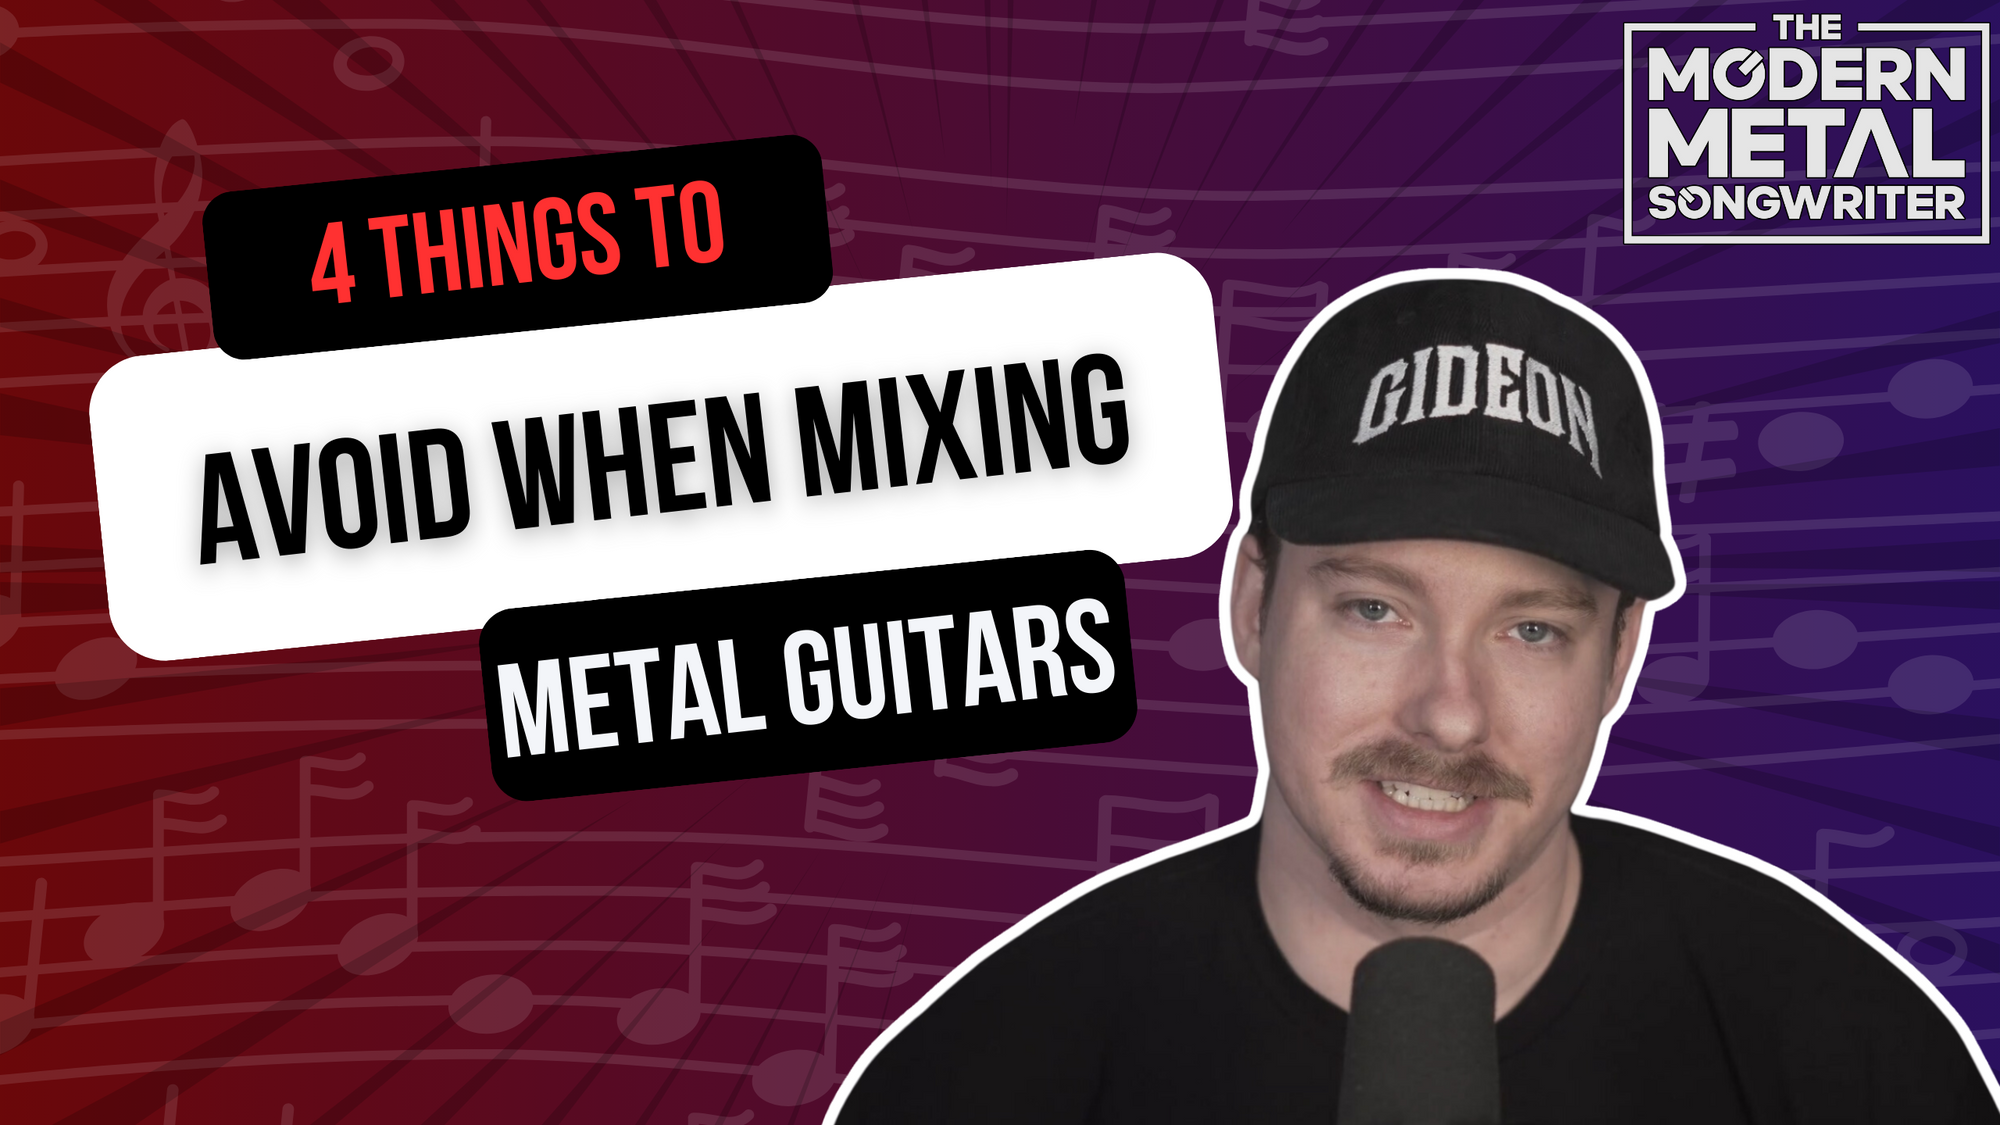 4-Things-to-AVOID-When-Mixing-Metal-Guitars ModernMetalSongwriter graphic